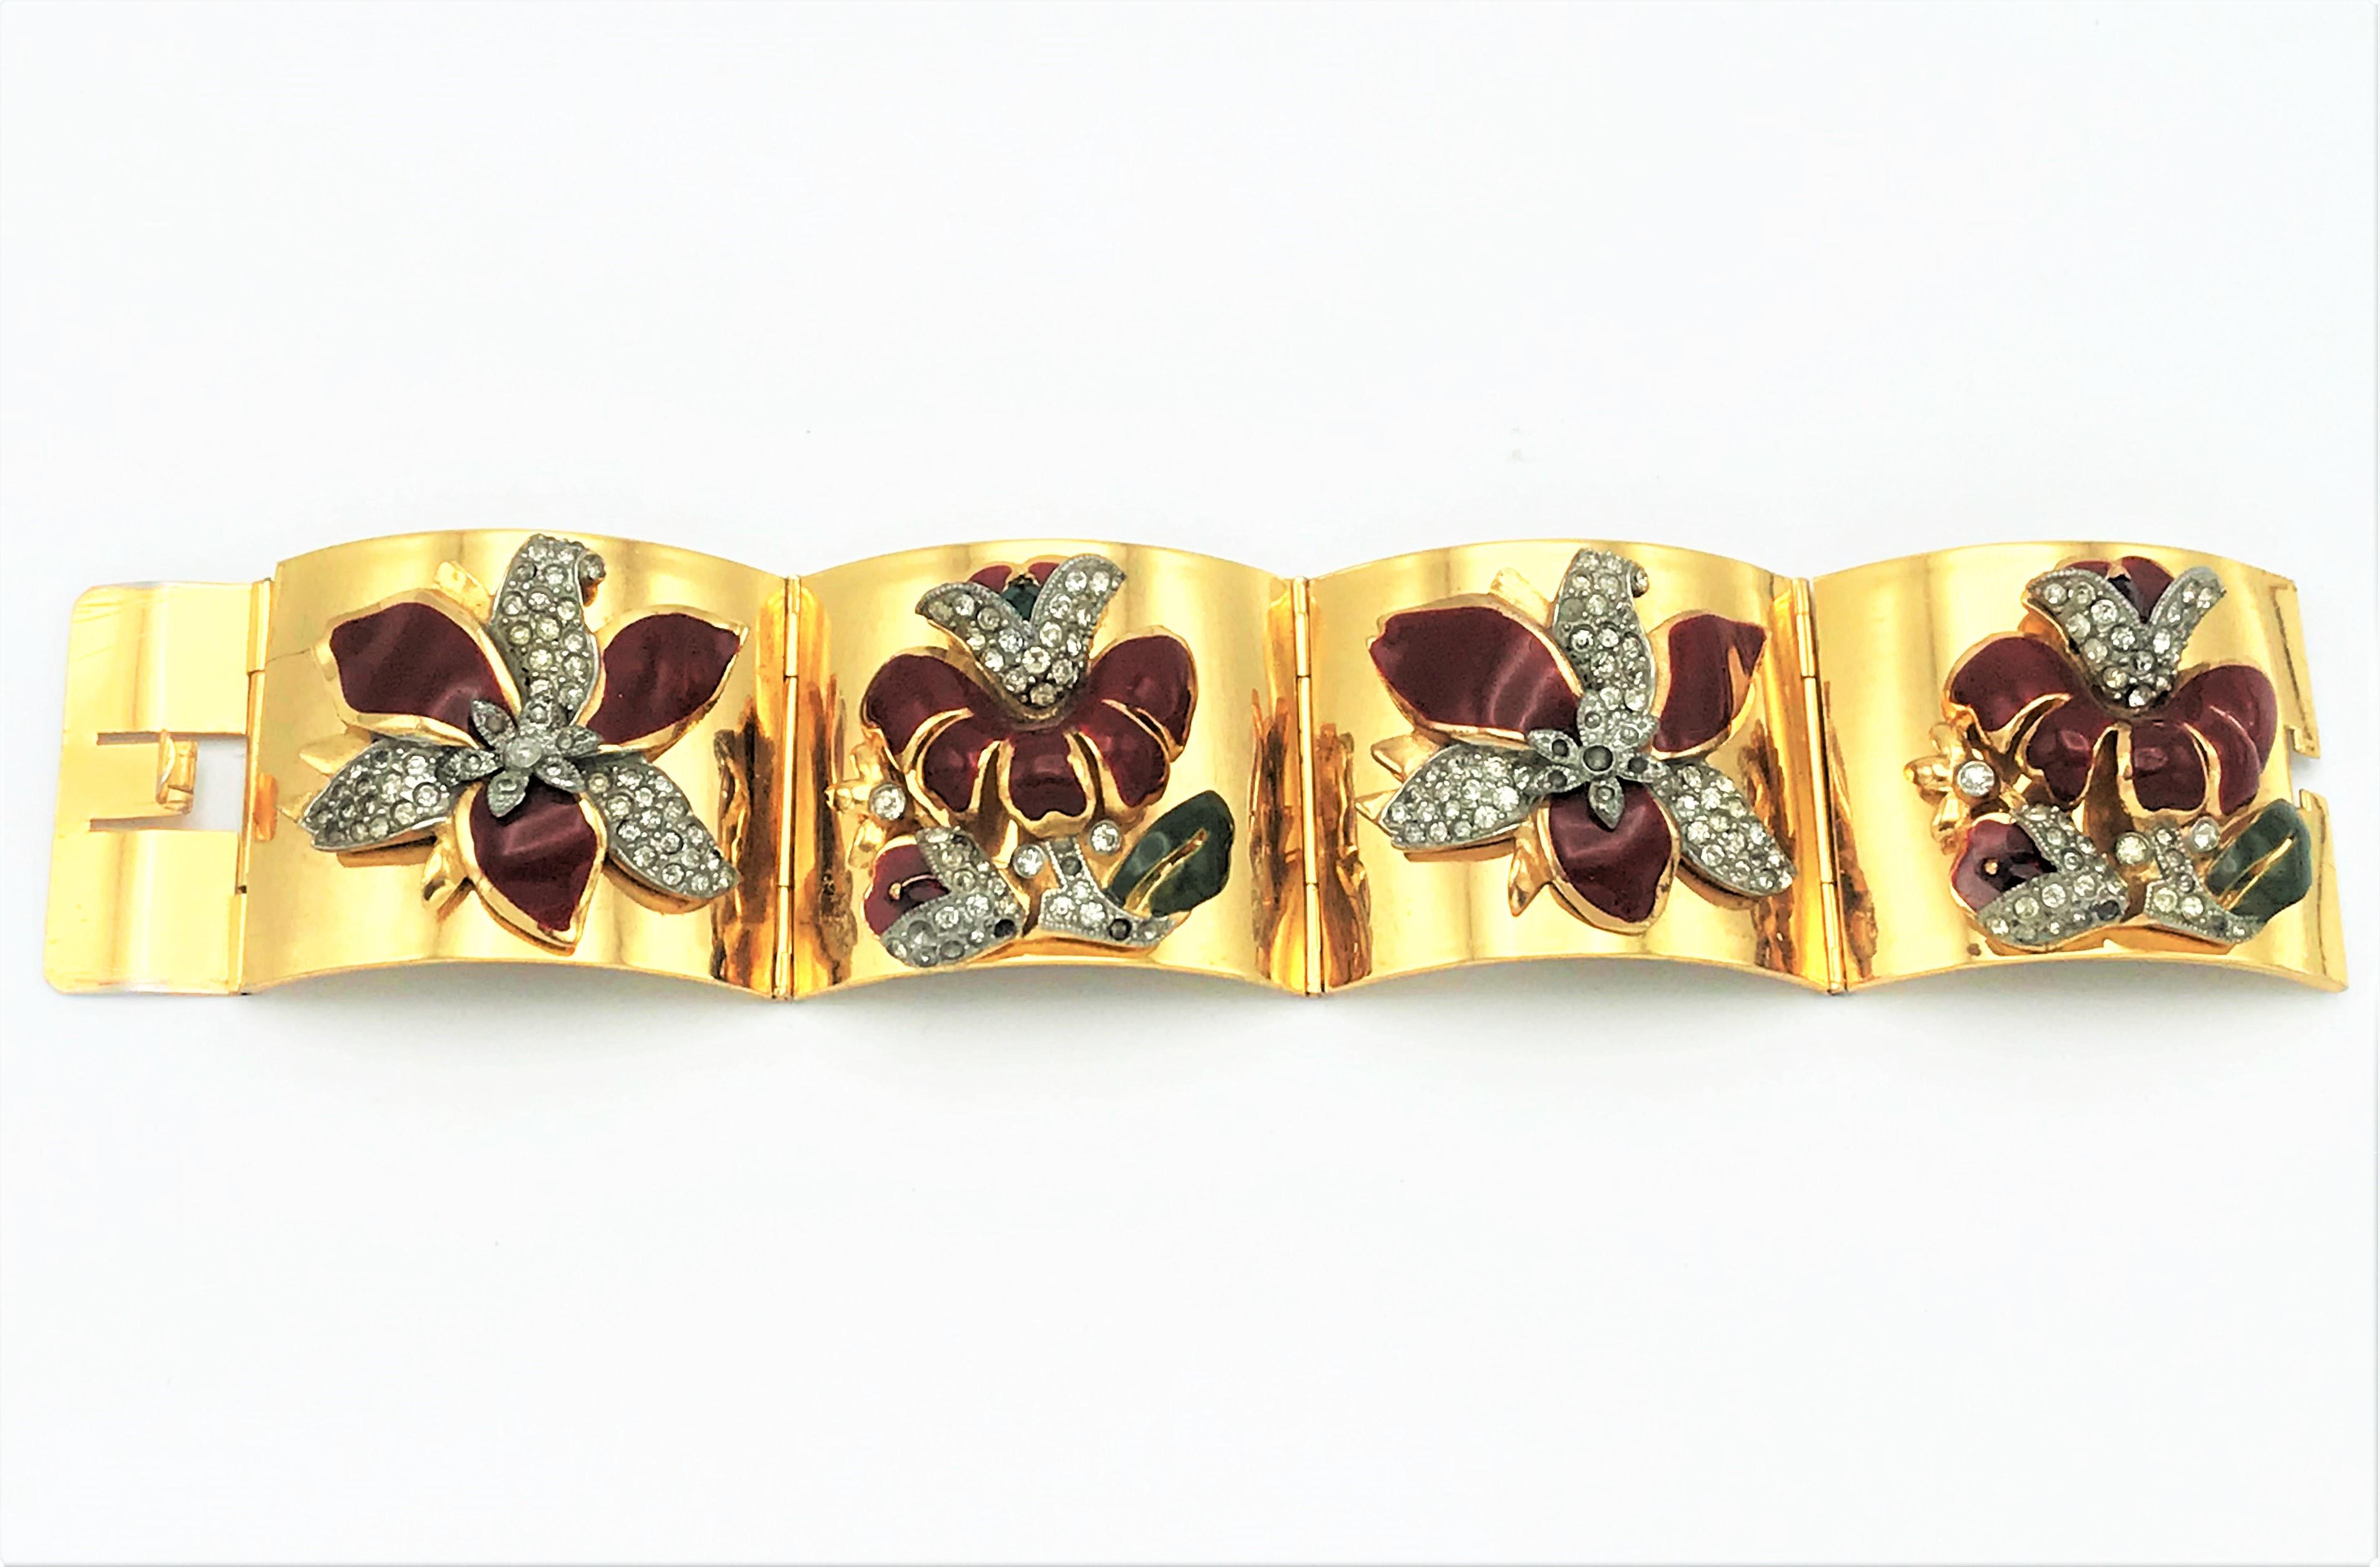 4-link gold plated bracelet. Each link part has an enameled red-brown flower with green leaves and flowers and leaves set with rhinestones attached. There are Duett brooches from Coro that are set with 2 of these flowers. It must be an unsigned